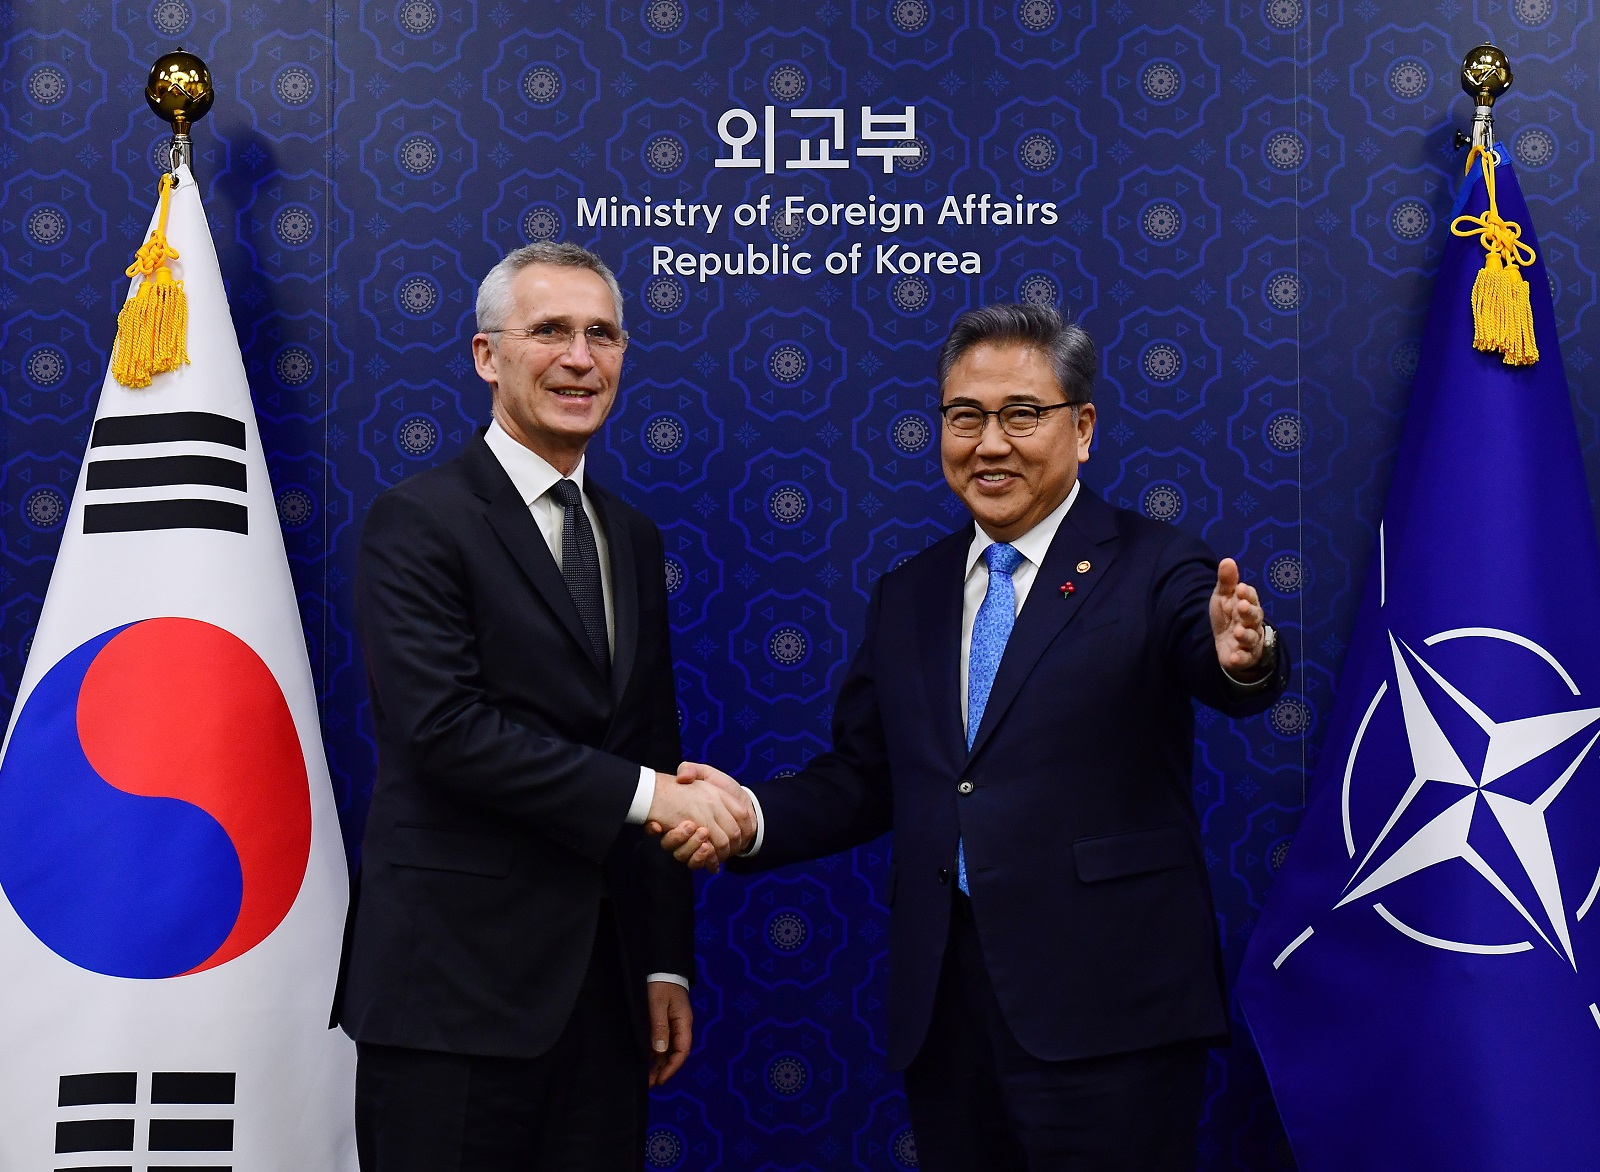 epa10437569 NATO Secretary General Jens Stoltenberg (L) shakes hands with the Minister of Foreign Affairs of South Korea Park Jin (R) during their meeting at the Foreign Ministry in Seoul, South Korea, 29 January 2023.  EPA/Kim Min-Hee / POOL